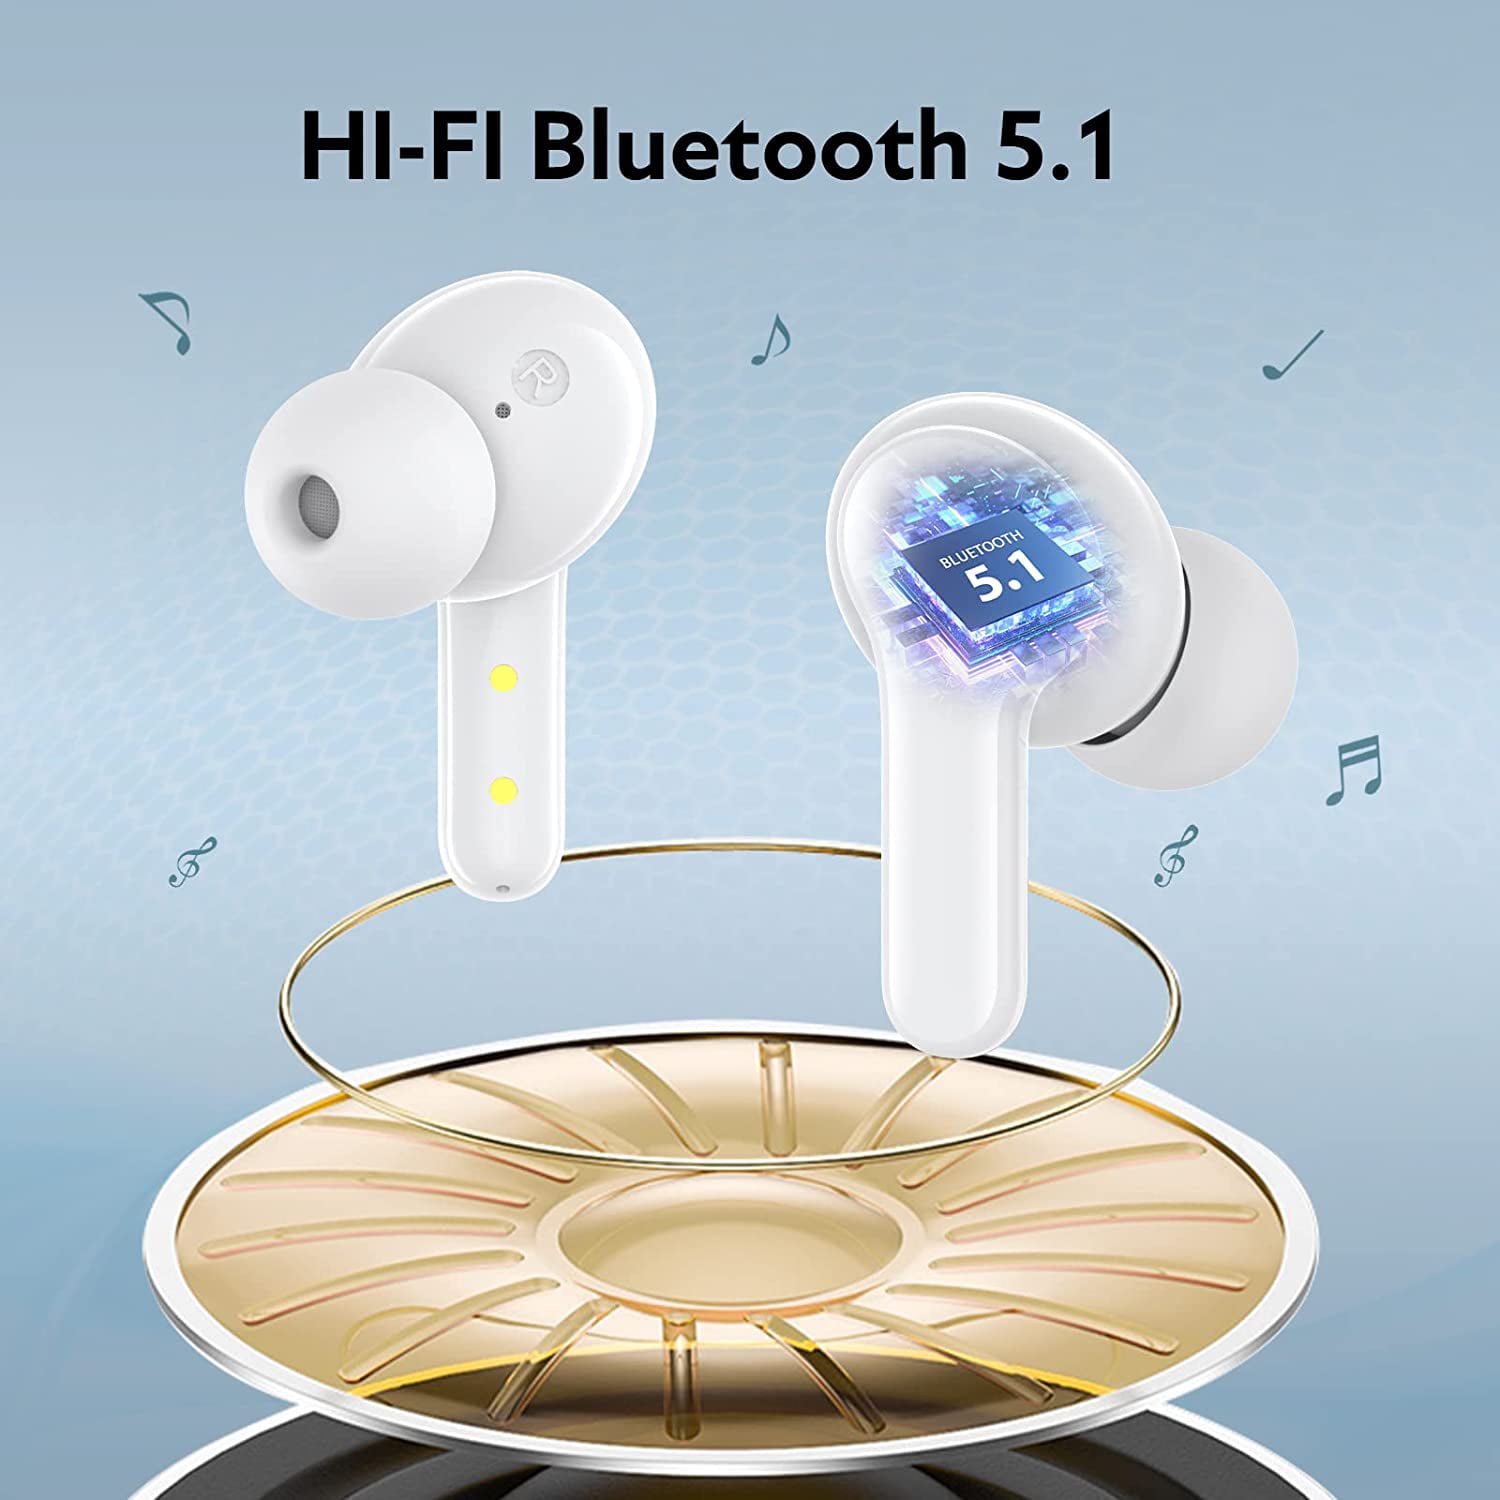 QCY T13 ANC Wireless Earphones Bluetooth 5.3 TWS ANC Noise Cancellatio –  Turtle and Rabbit